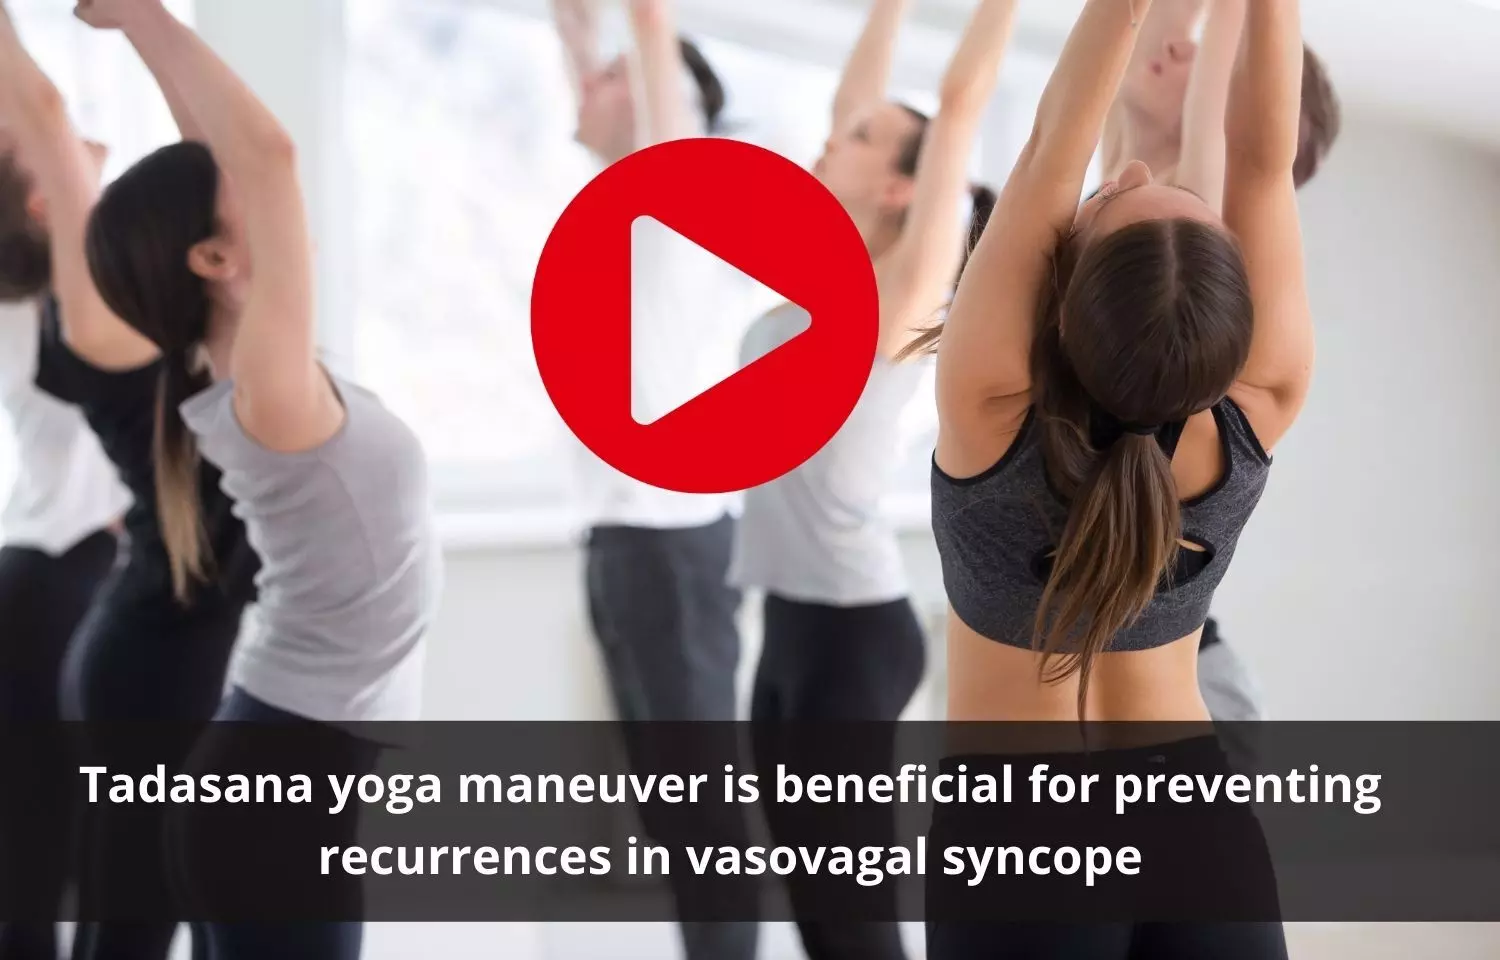 Tadasana yoga maneuver is beneficial for preventing recurrences in vasovagal syncope